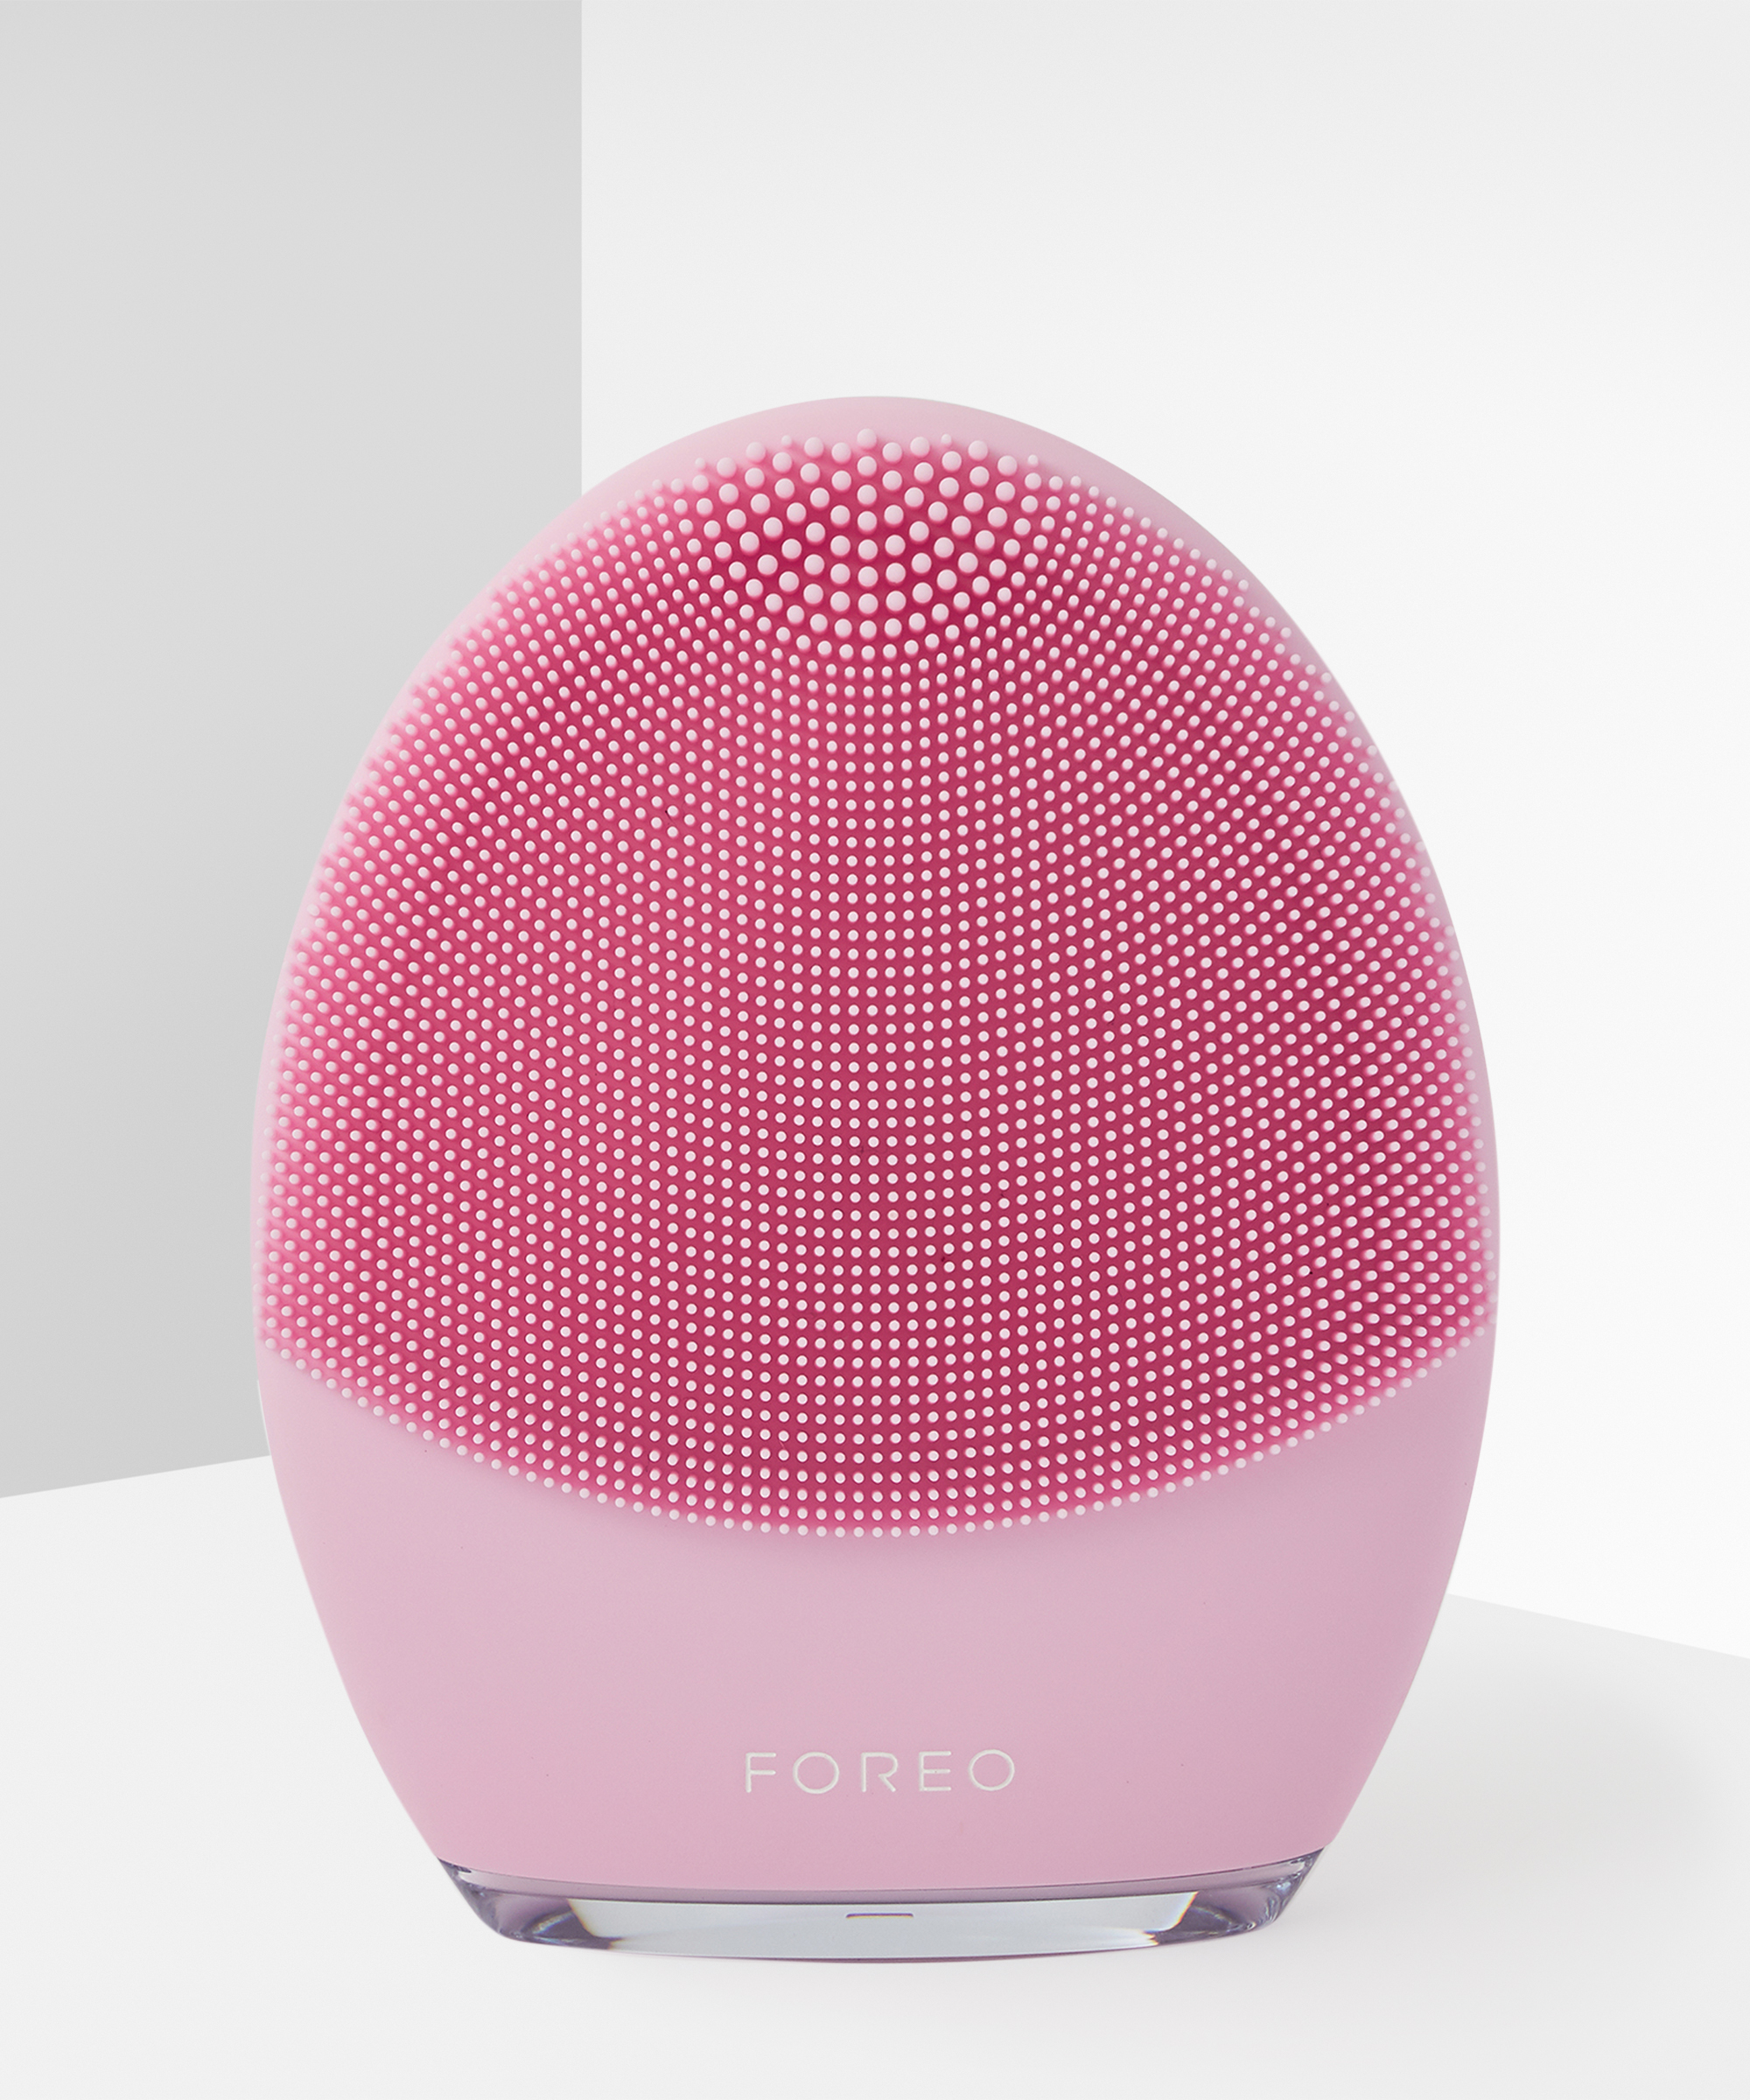 LUNA For BAY at BEAUTY Normal Facial and Foreo Sonic Cleanser Massager Skin Anti-Aging 3